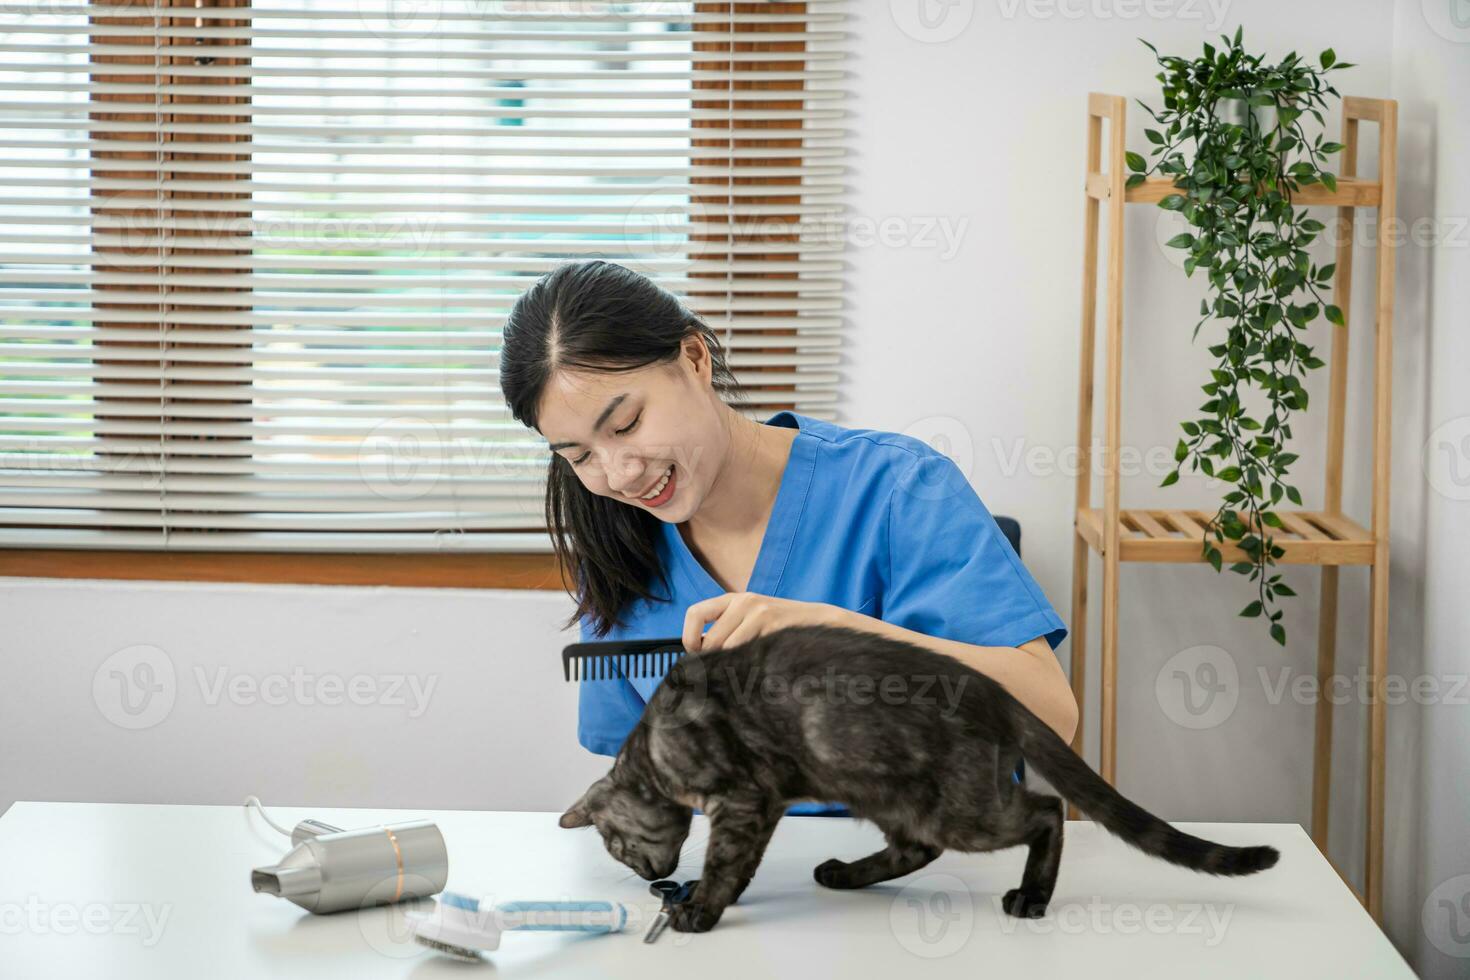 Vet surgeon. Cat on examination table of veterinarian clinic. Veterinary care. Vet doctor and cat photo